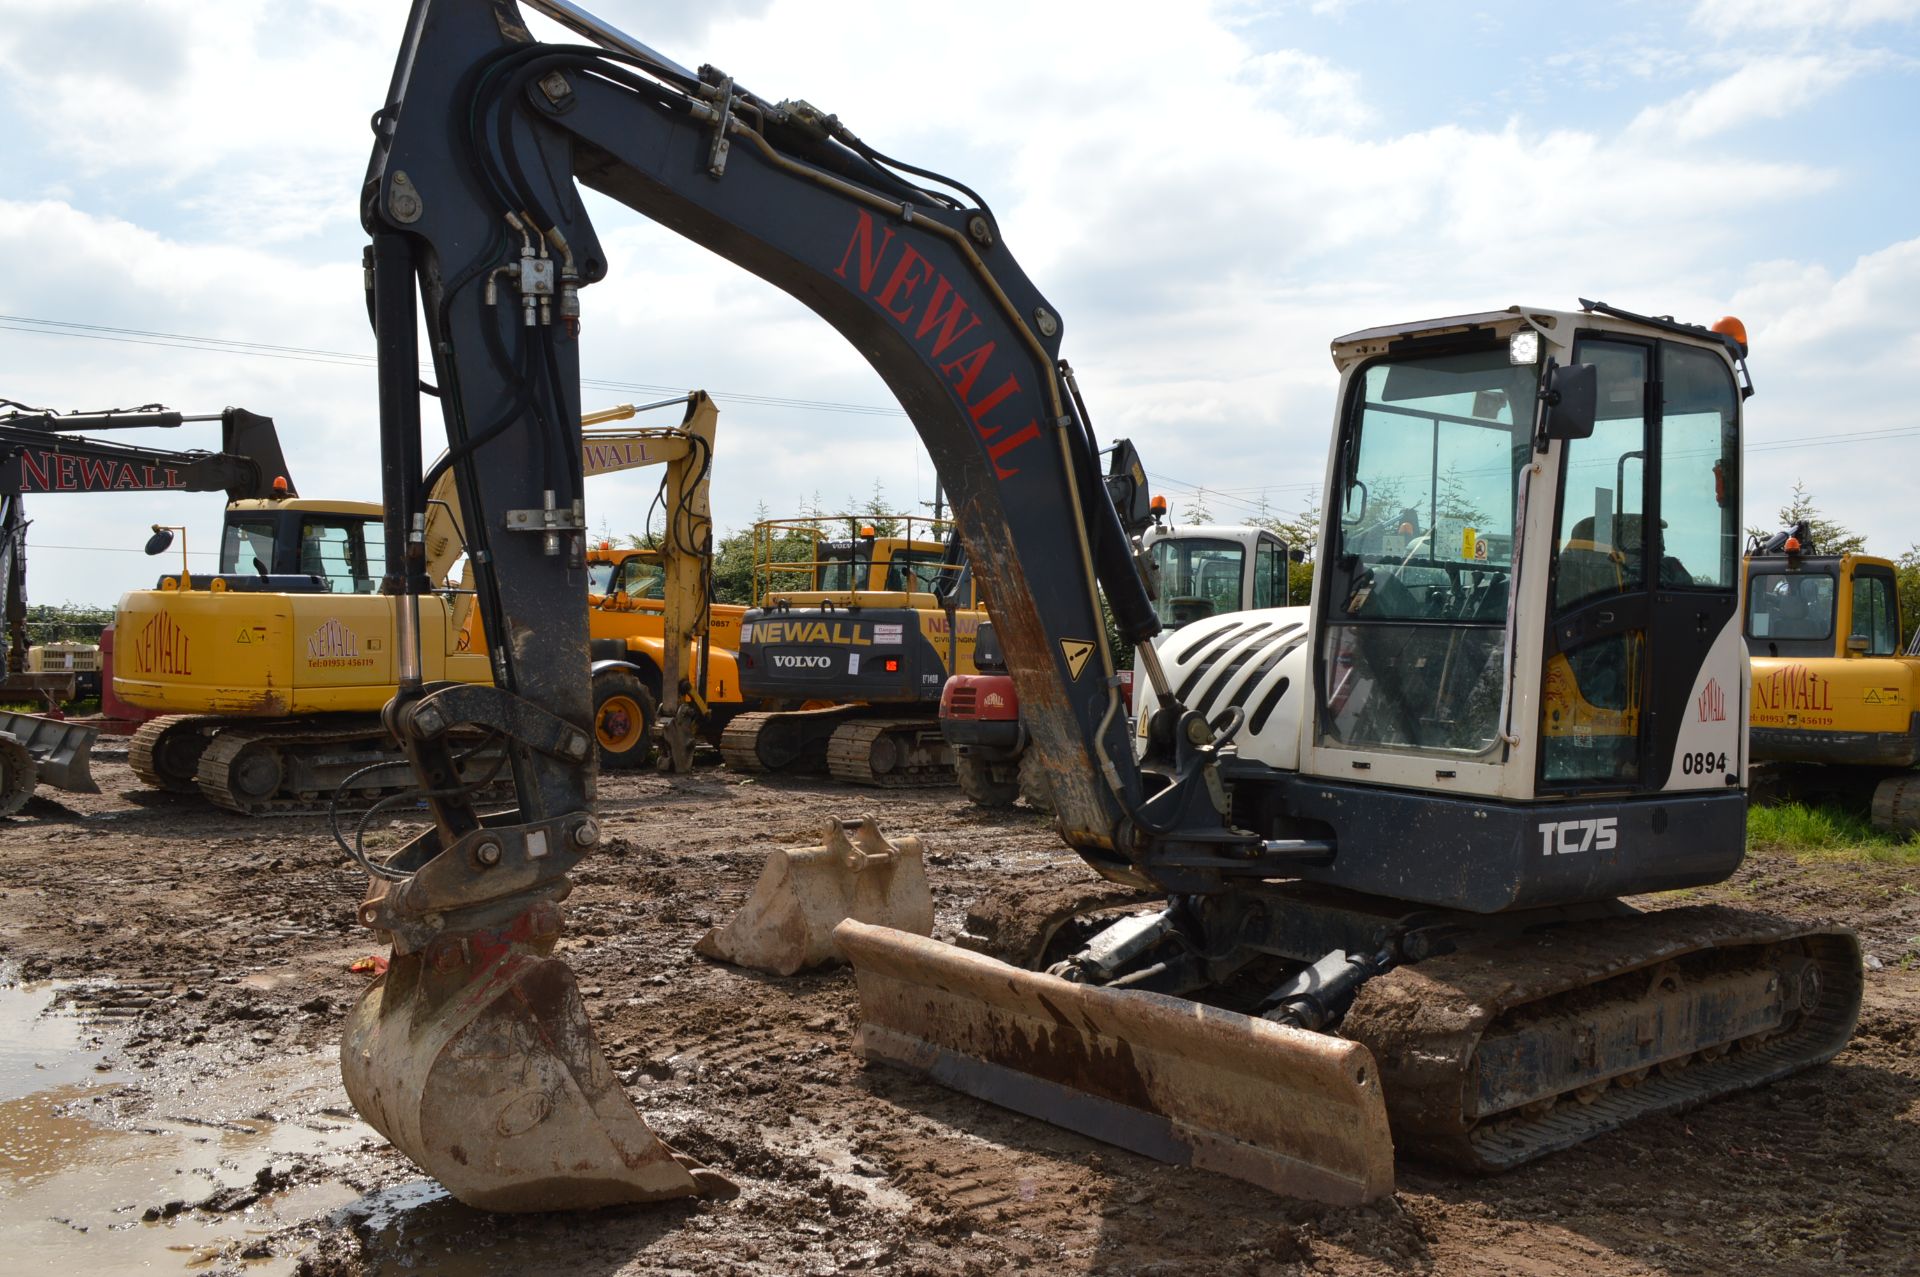 Terex 7.5t Rubber Tracked Excavator with Blade, Qu - Image 3 of 32